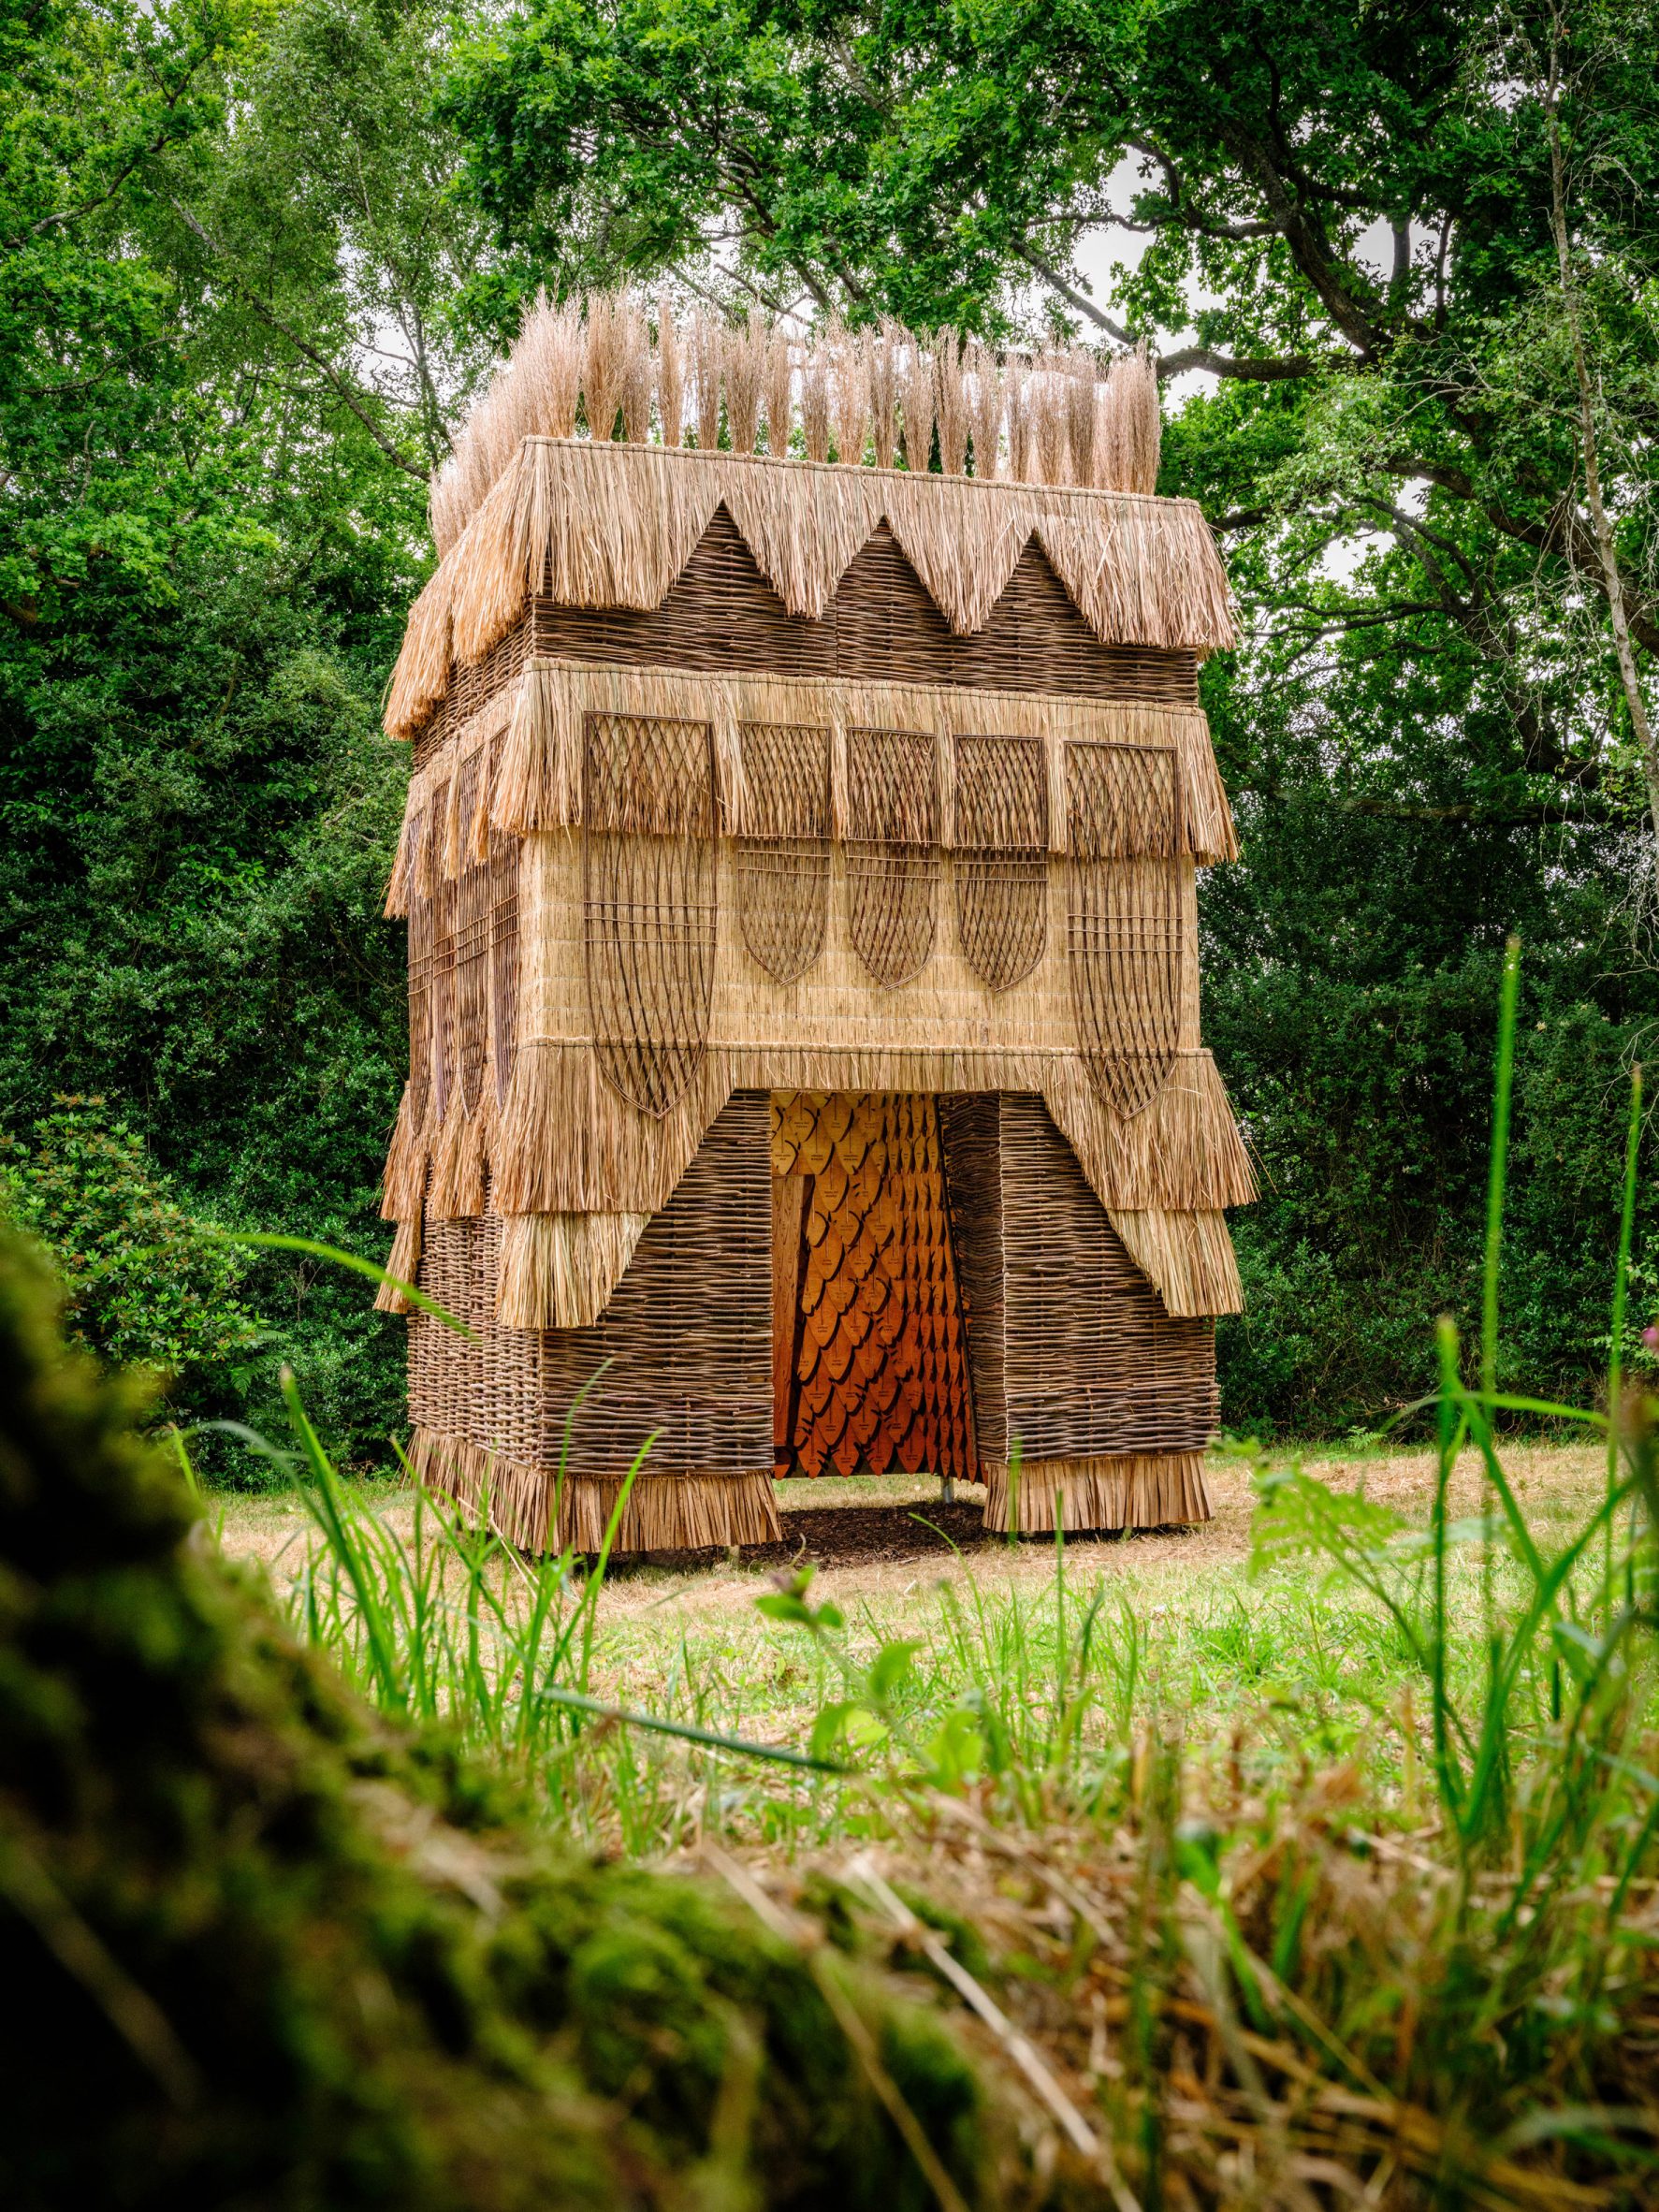 Wrapped in Enset Leaves, Ethiopia Cultural Inspiration through the False Banana Pavilion